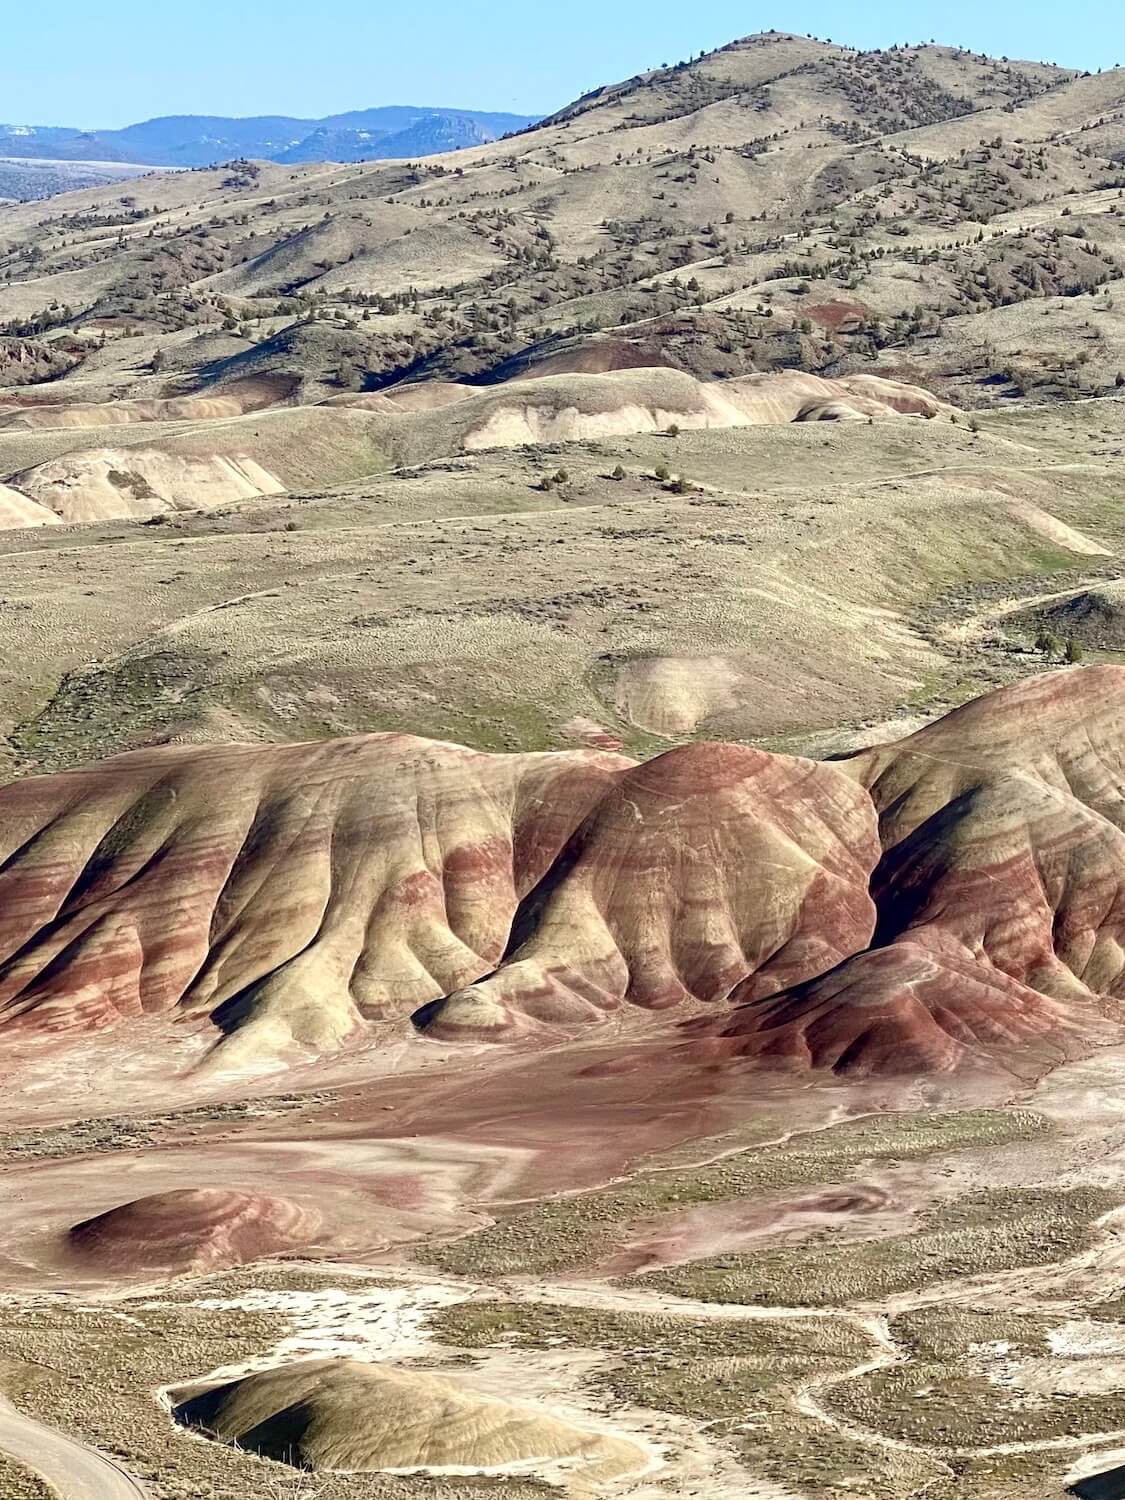 This photo, in the collection of Painted Hills Oregon photos showcases the unique formations of soil that show many layers of life in the ancient history of Oregon.  